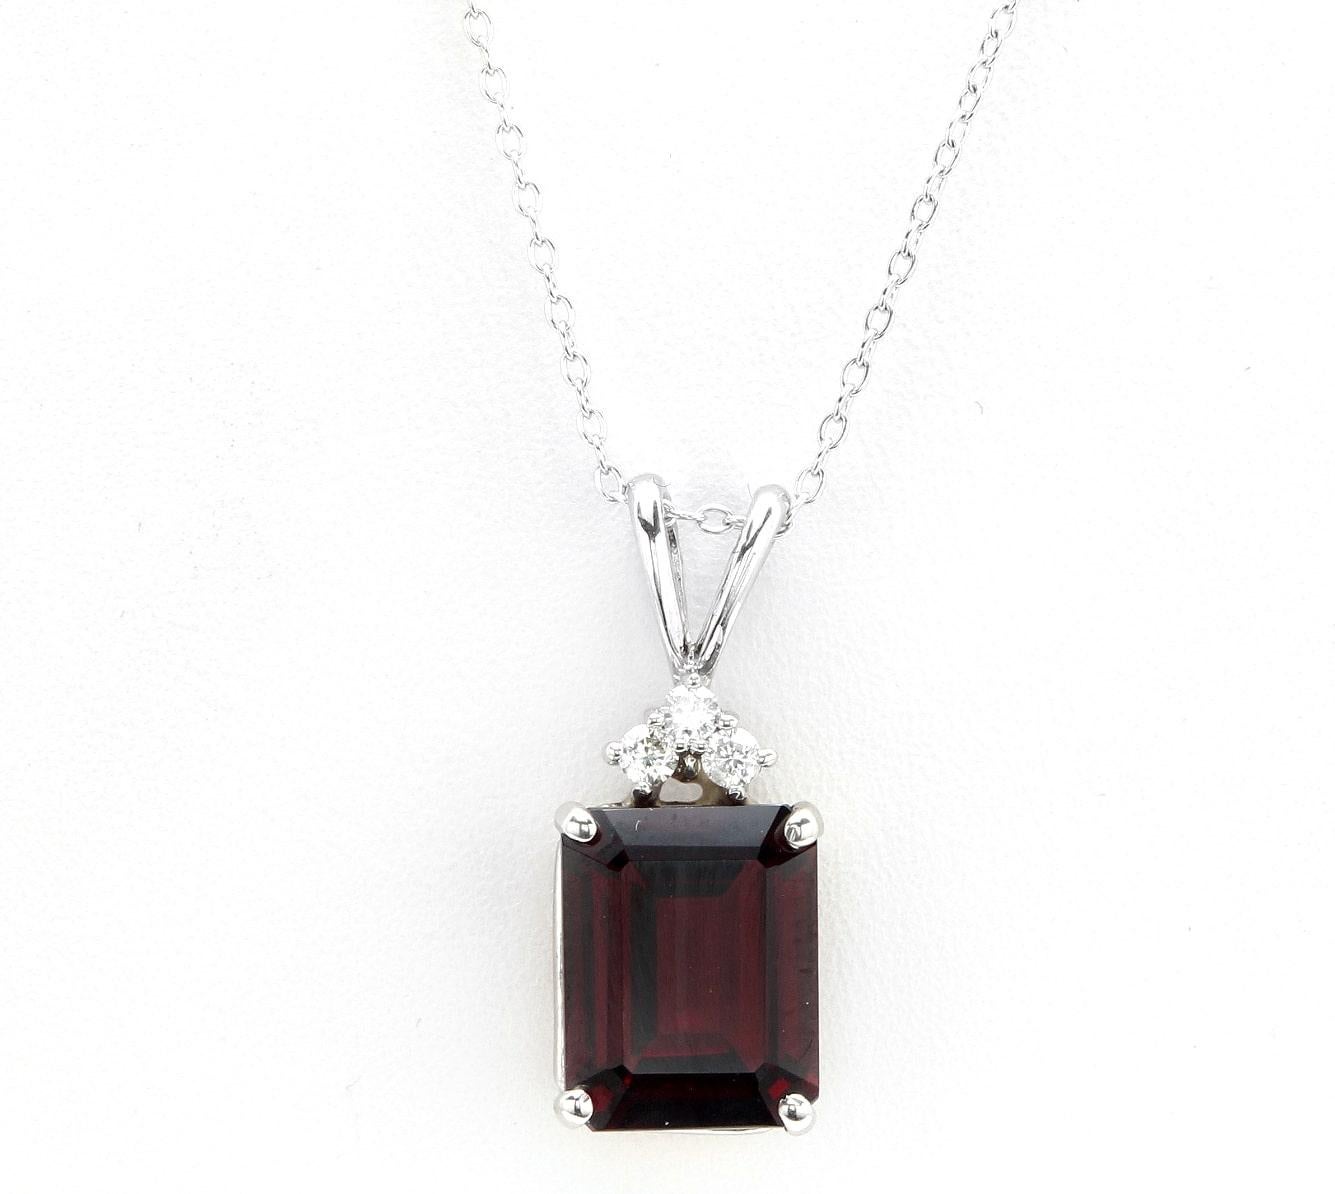 5.10Ct Natural Garnet and Diamond 14K Solid White Gold Necklace

Amazing looking piece! 

Stamped: 14K

Suggested Replacement Value: $3,000.00 

Natural Garnet Weights: Approx. 5.00 Carats

Garnet Measures: Approx. 10.80 x 8.65 mm

Total Natural